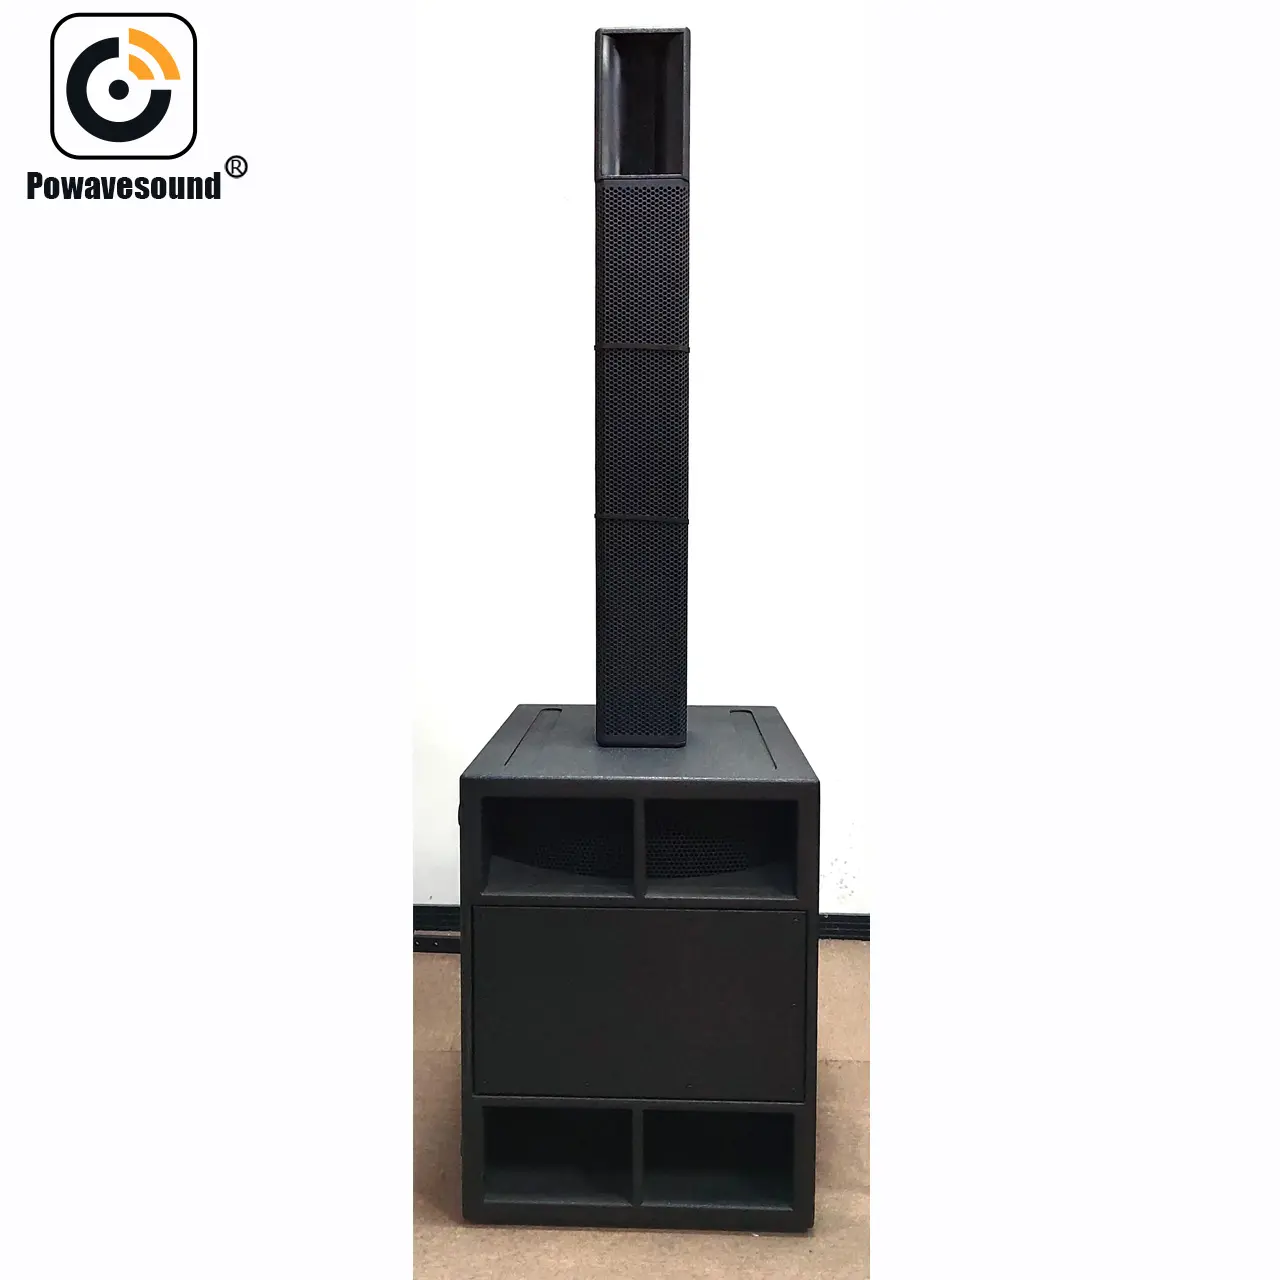 Active combo pa speaker 2.1 stereo sound system with 18" Subwoofer & 5 inch column line array speaker top satellite + Sub set